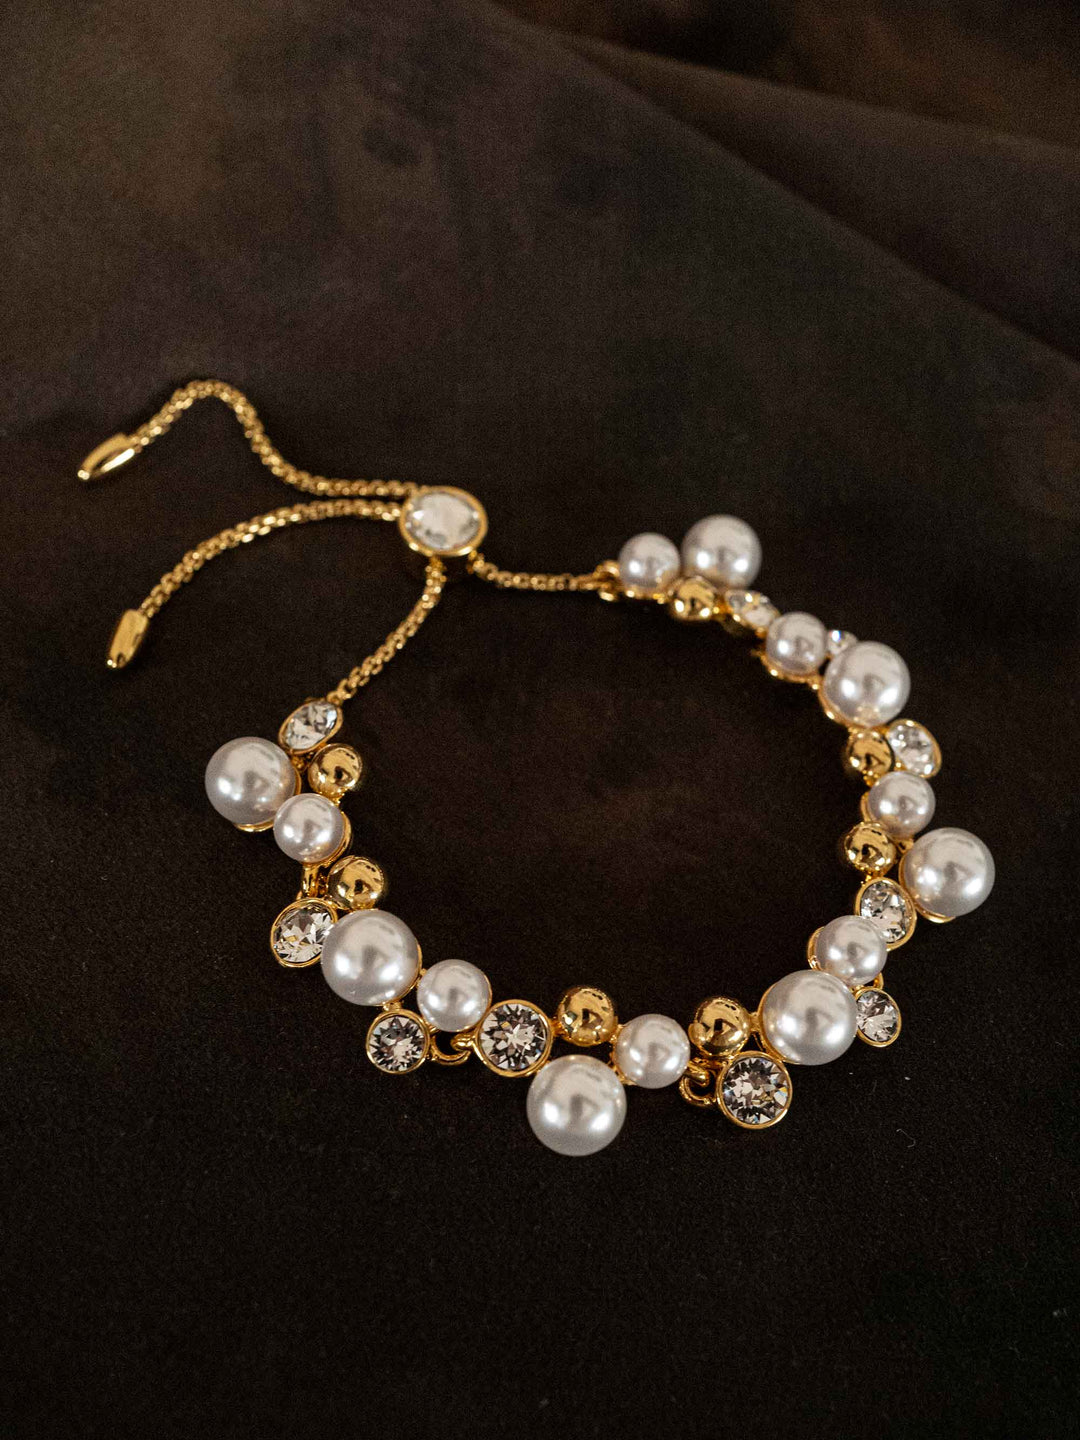 A bracelet of pearls and glass crystals